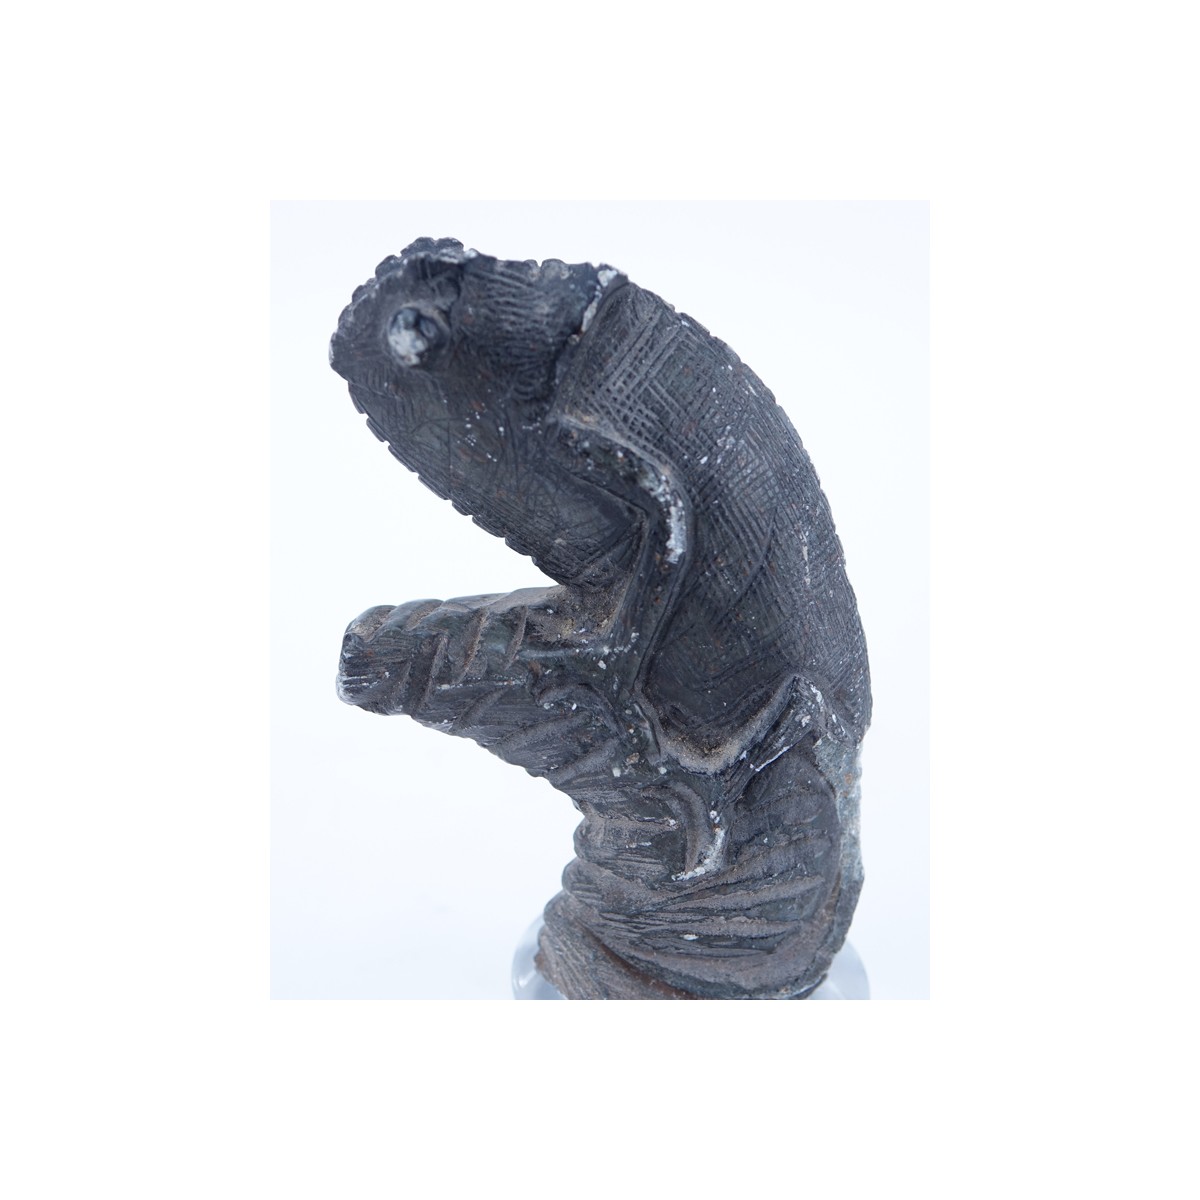 Ancient Stone Carving "Chameleon" Unsigned. Losses, condition com